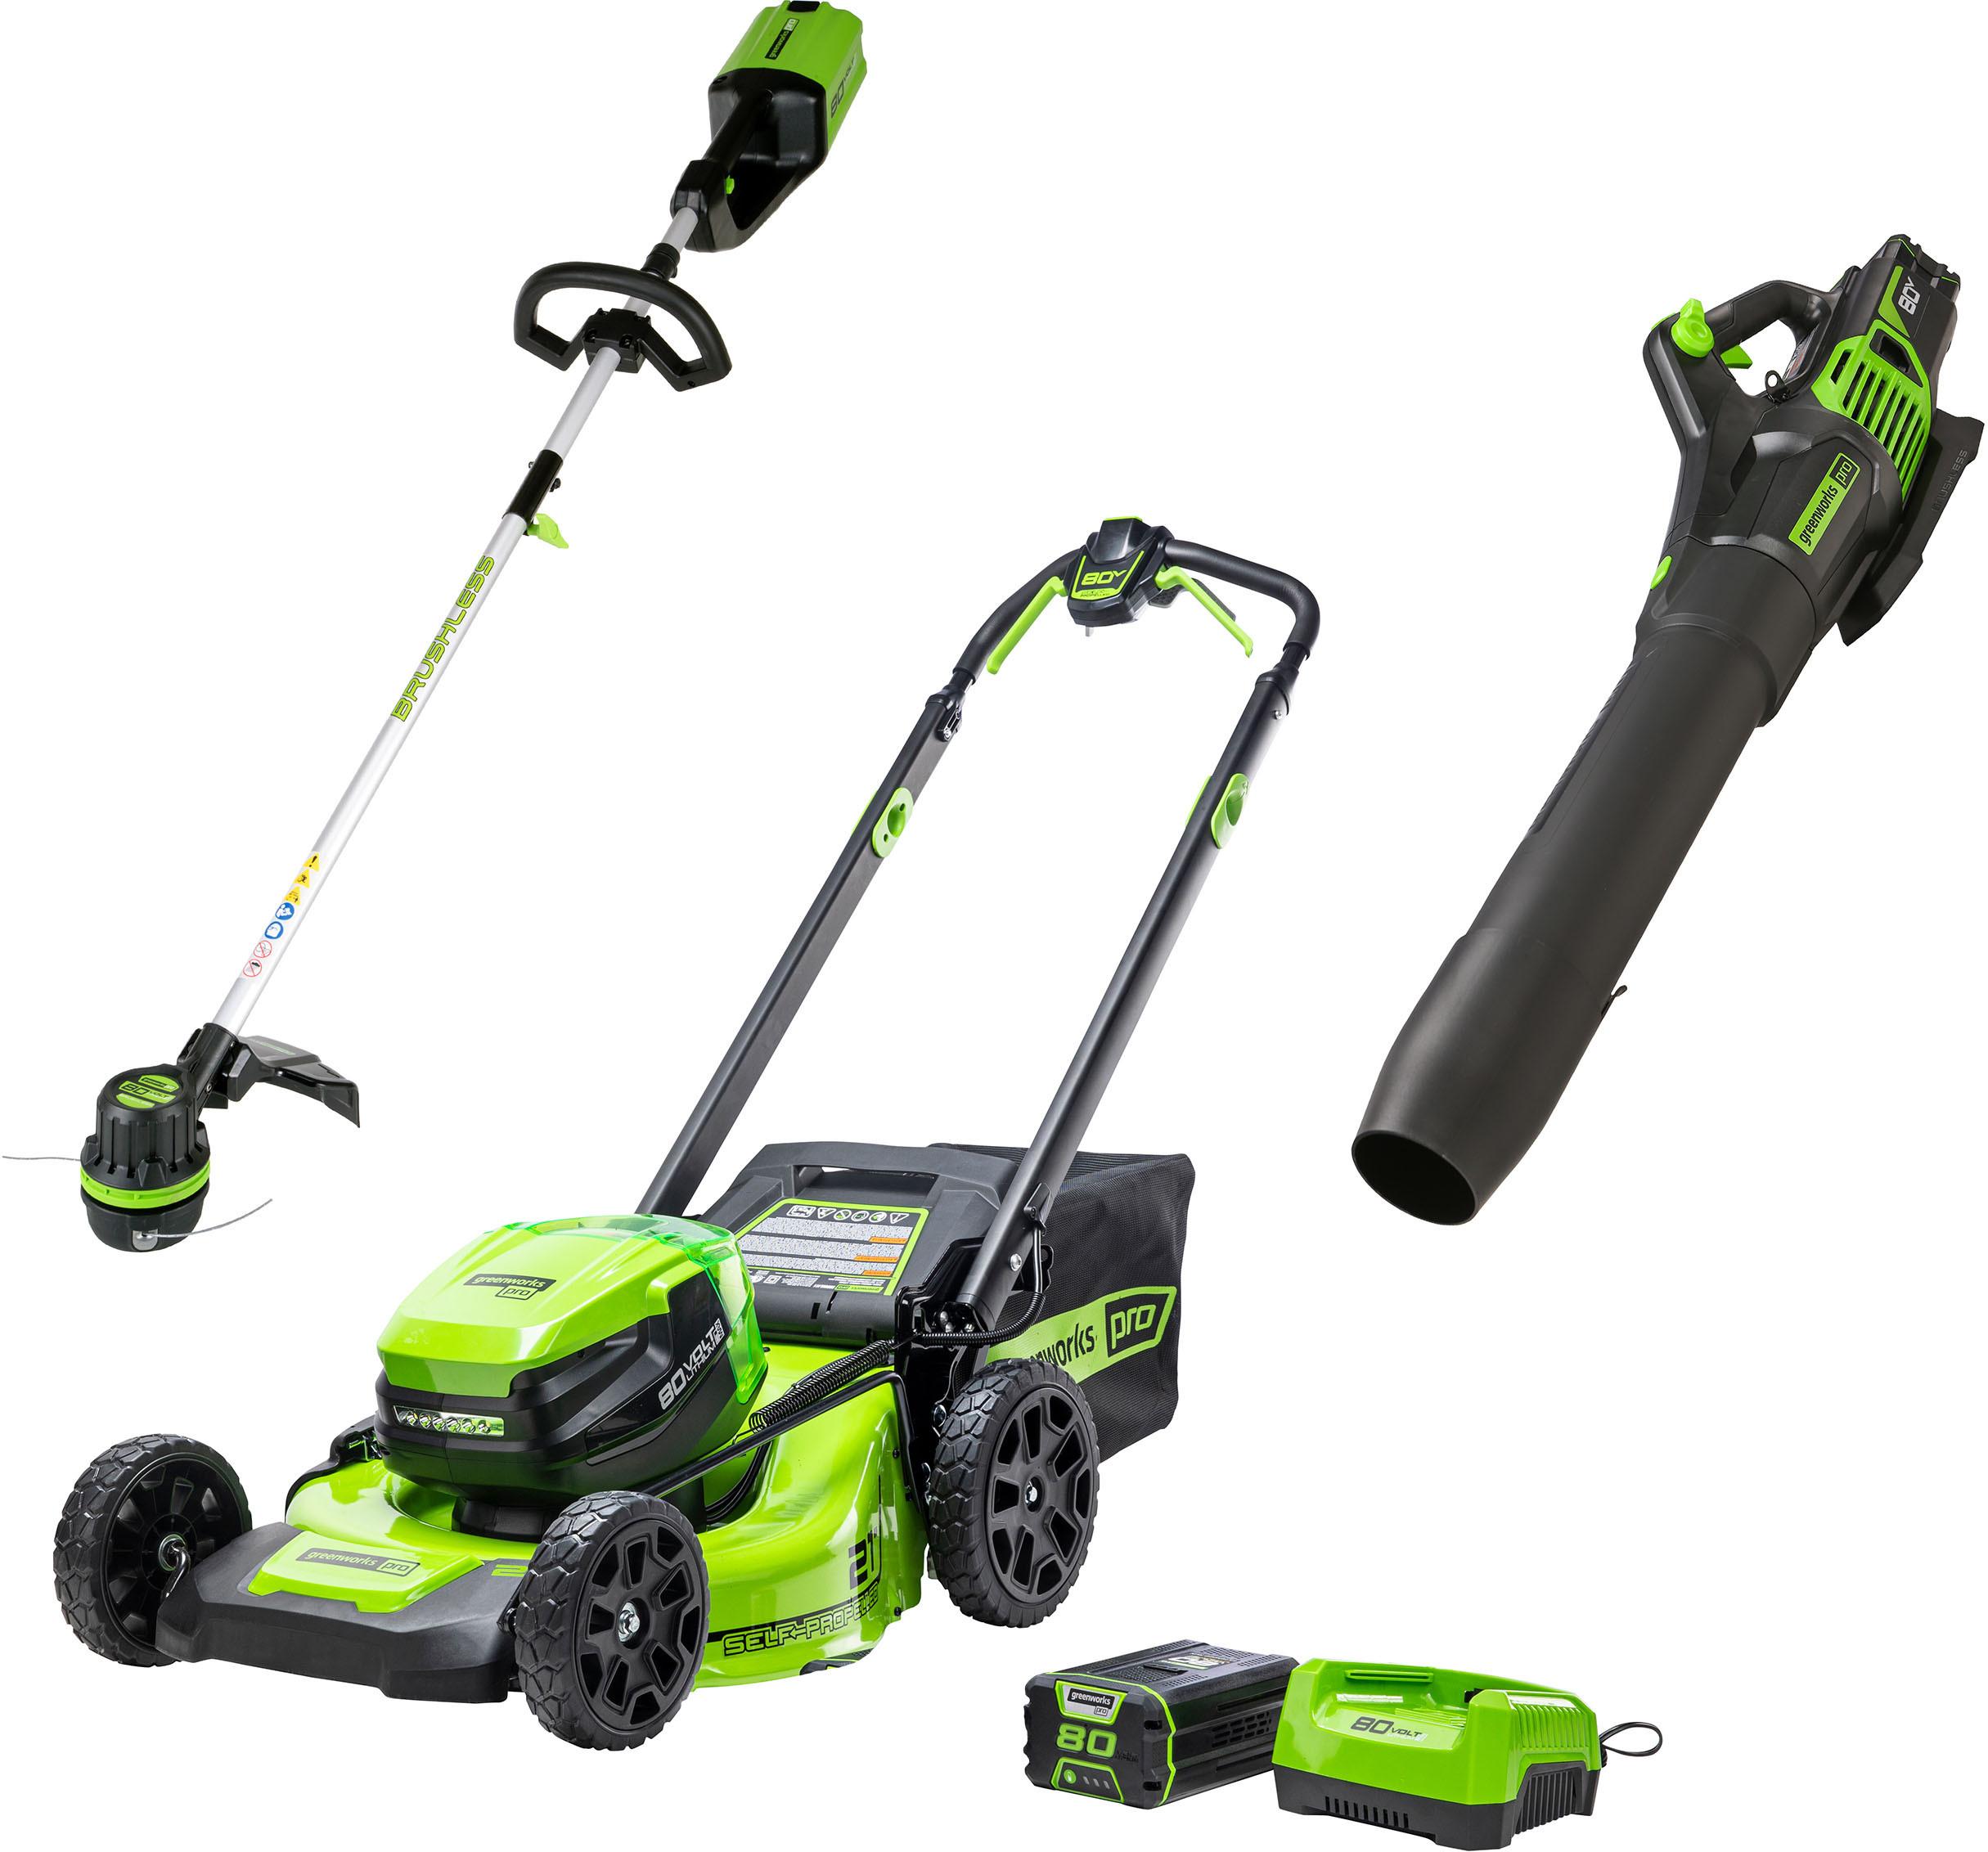 https://i8.amplience.net/i/aarons/6754919/80V%2021%E2%80%9D%20Lawn%20Mower,%2013%E2%80%9D%20String%20Trimmer,%20and%20730%20Lear%20Blower%20Combo%20with%204%20Ah%20Battery%20&%20Charger)%203-piece%20combo%20-%20Green?$large$